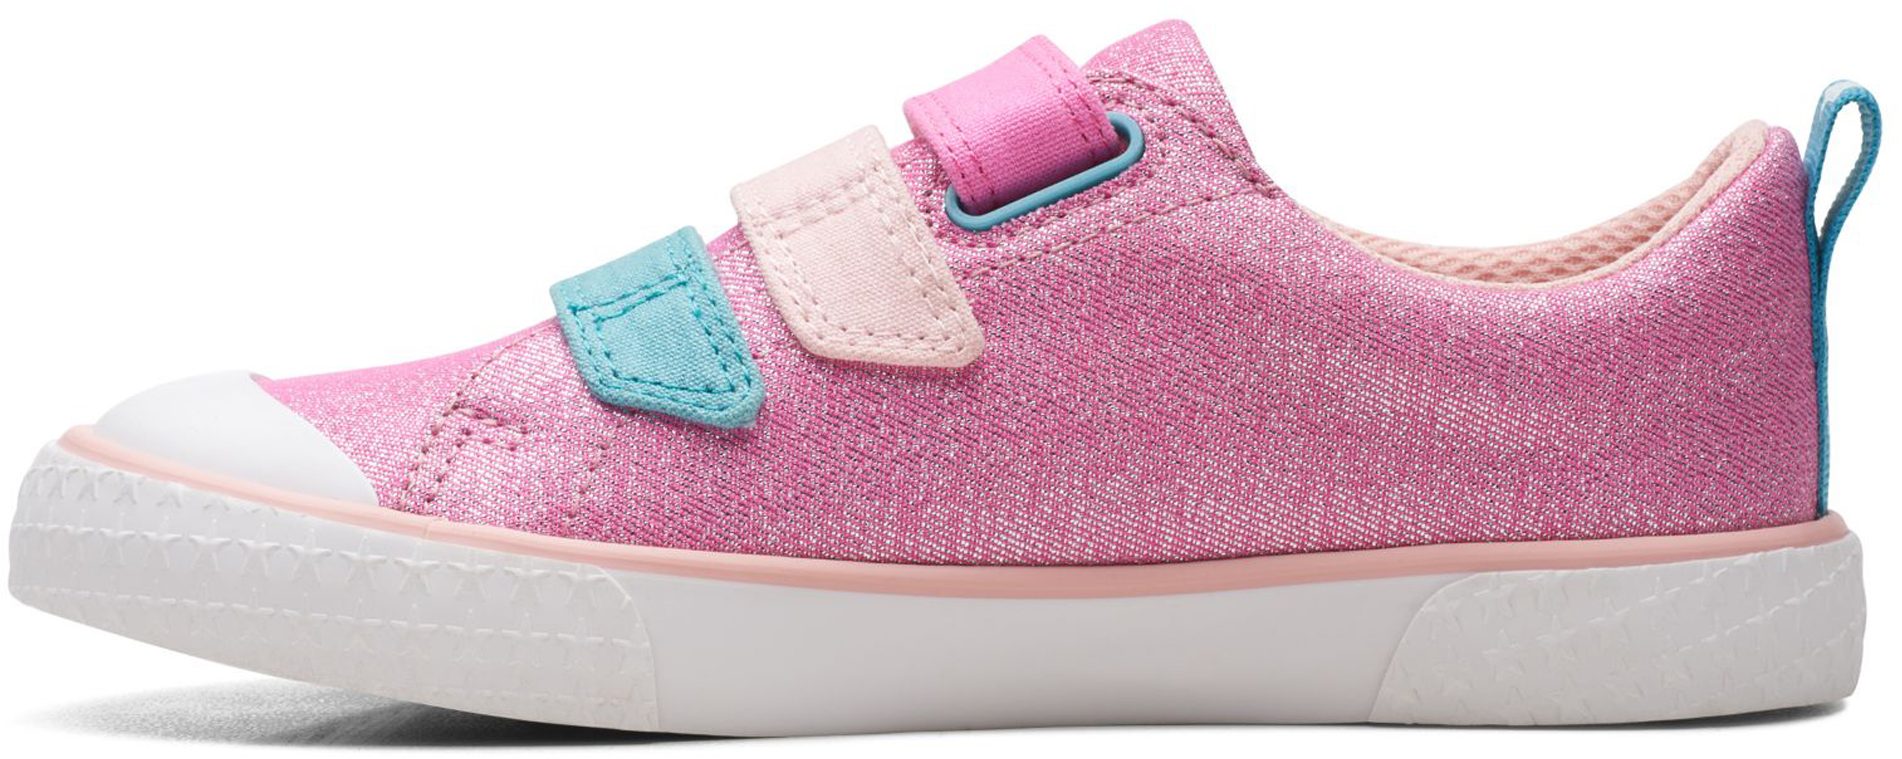 Clarks Foxing Play Kids Pink Canvas 26172655 - Girls Canvas Styles ...